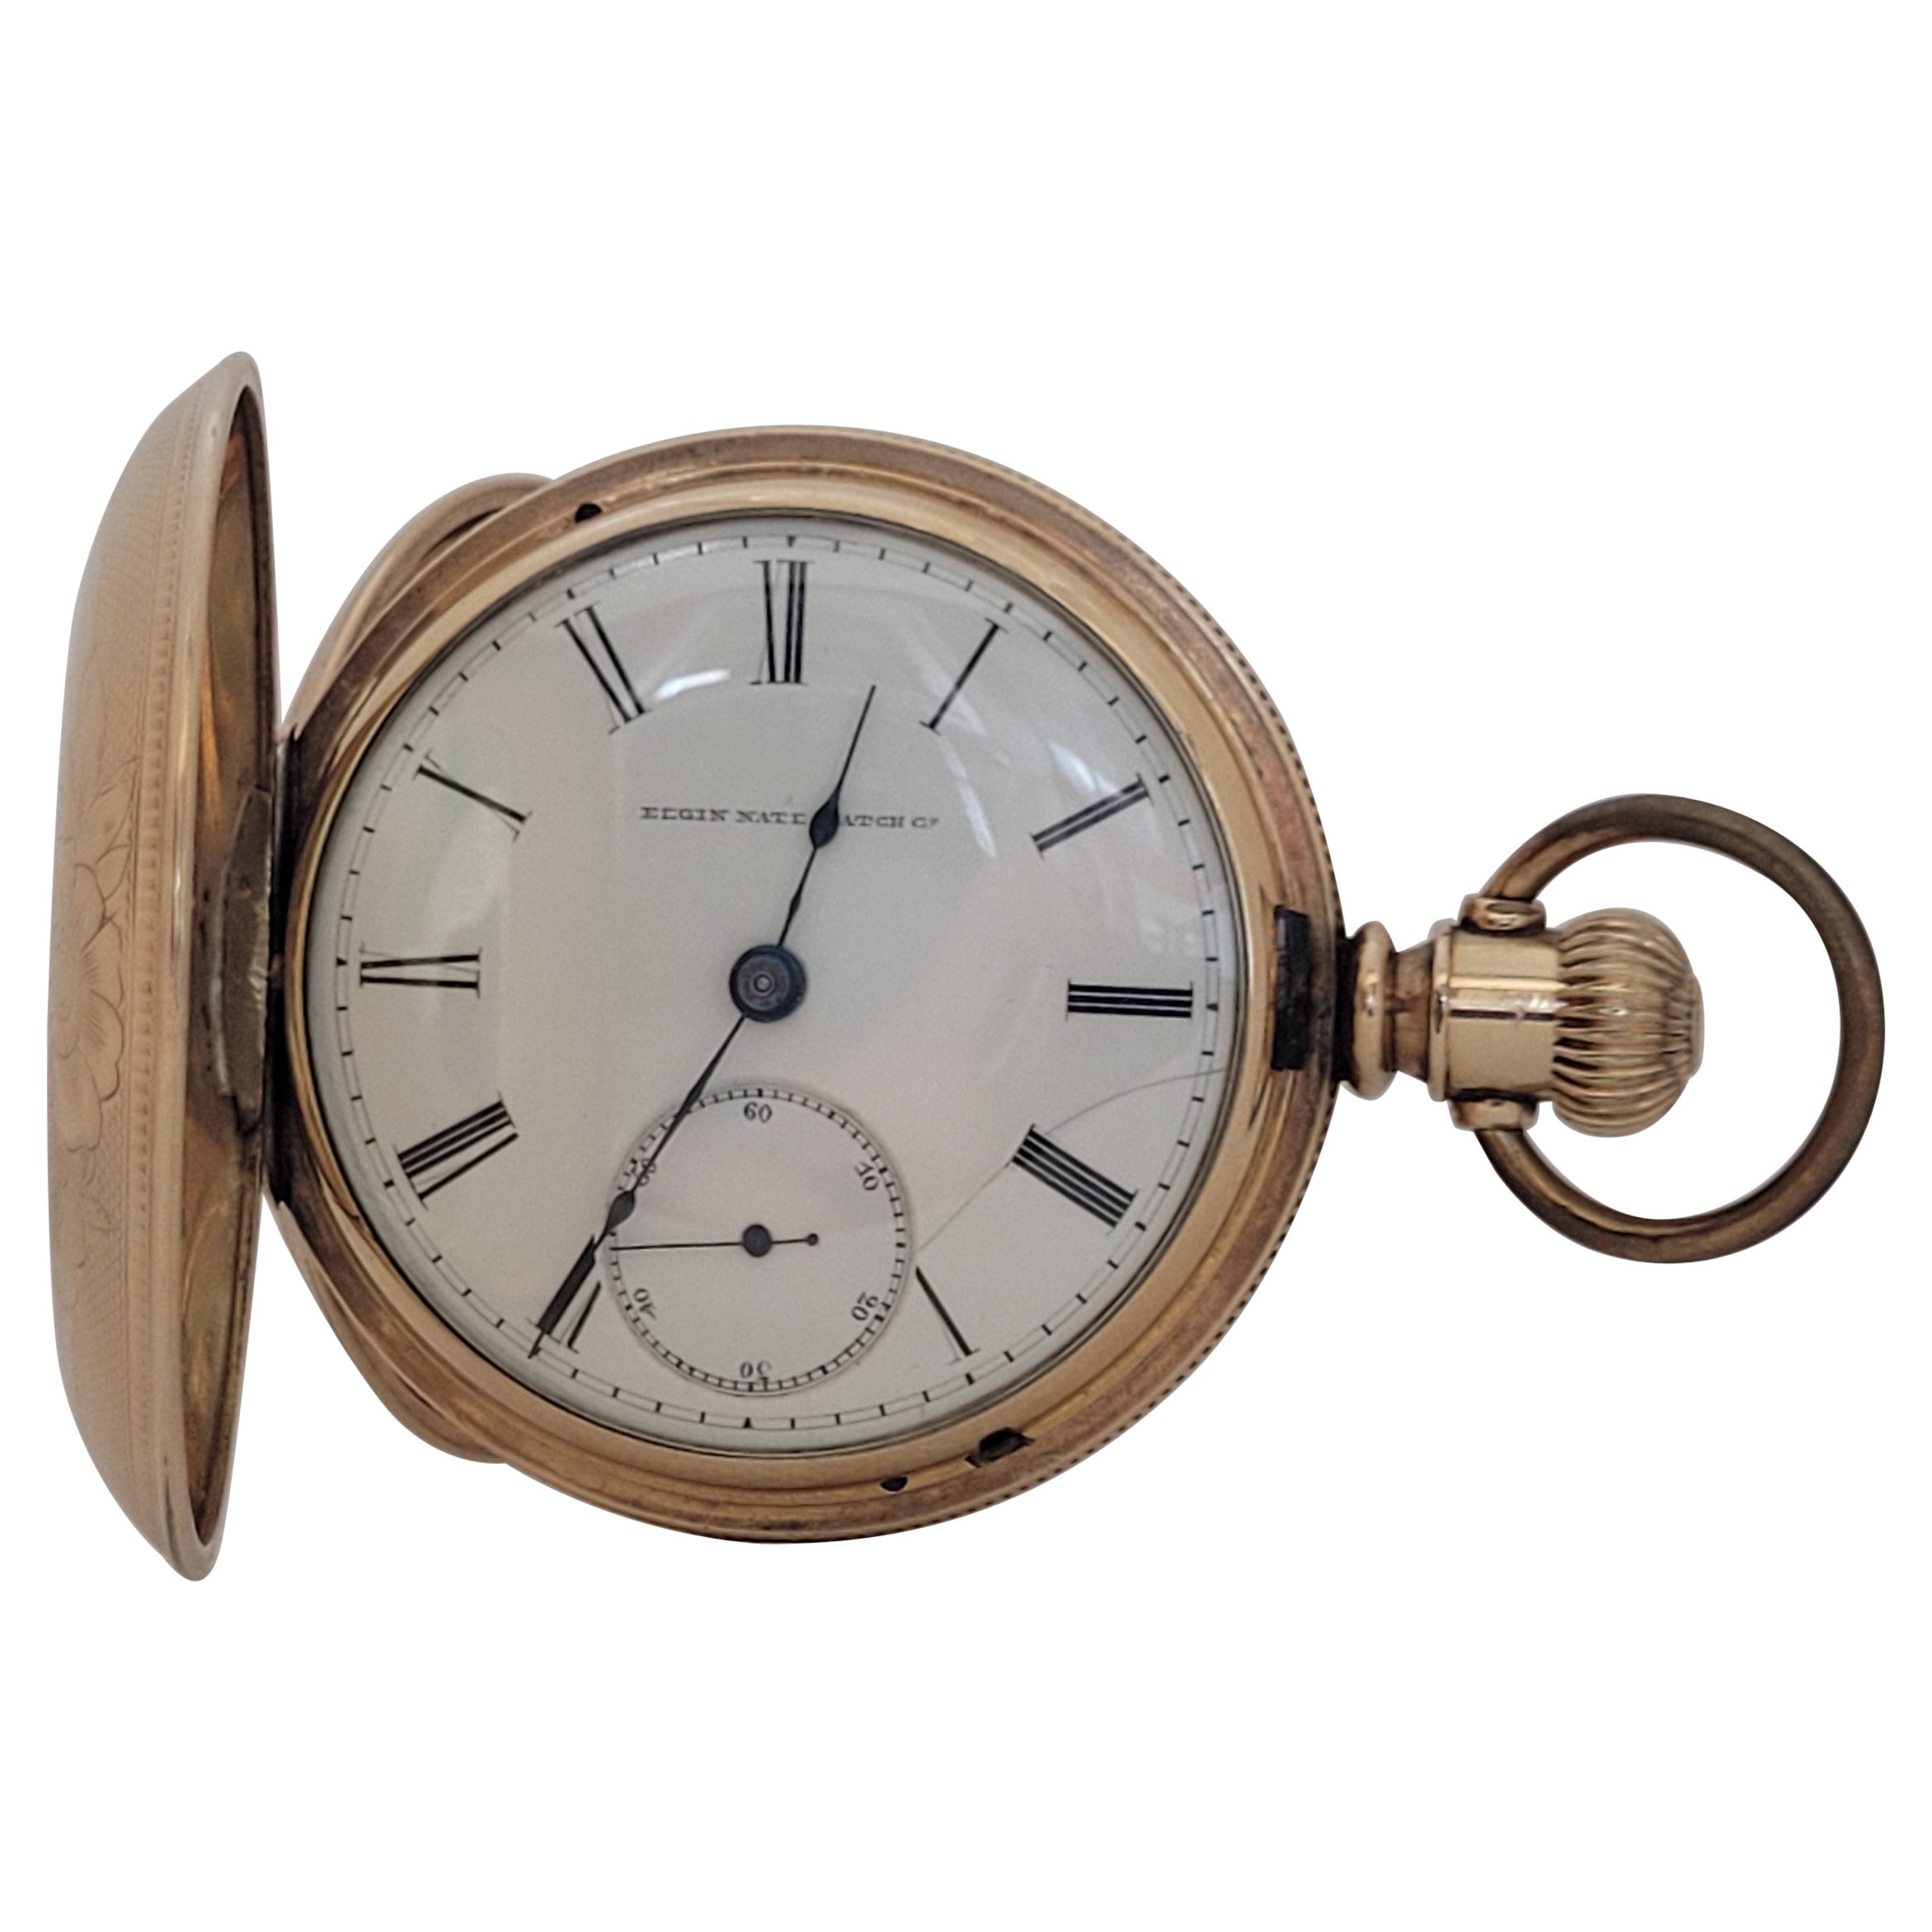 Elgin National Watch Co - 6 For Sale on 1stDibs | elgin natl watch co, elgin  national watch company pocket watch, elgin natl watch co pocket watch